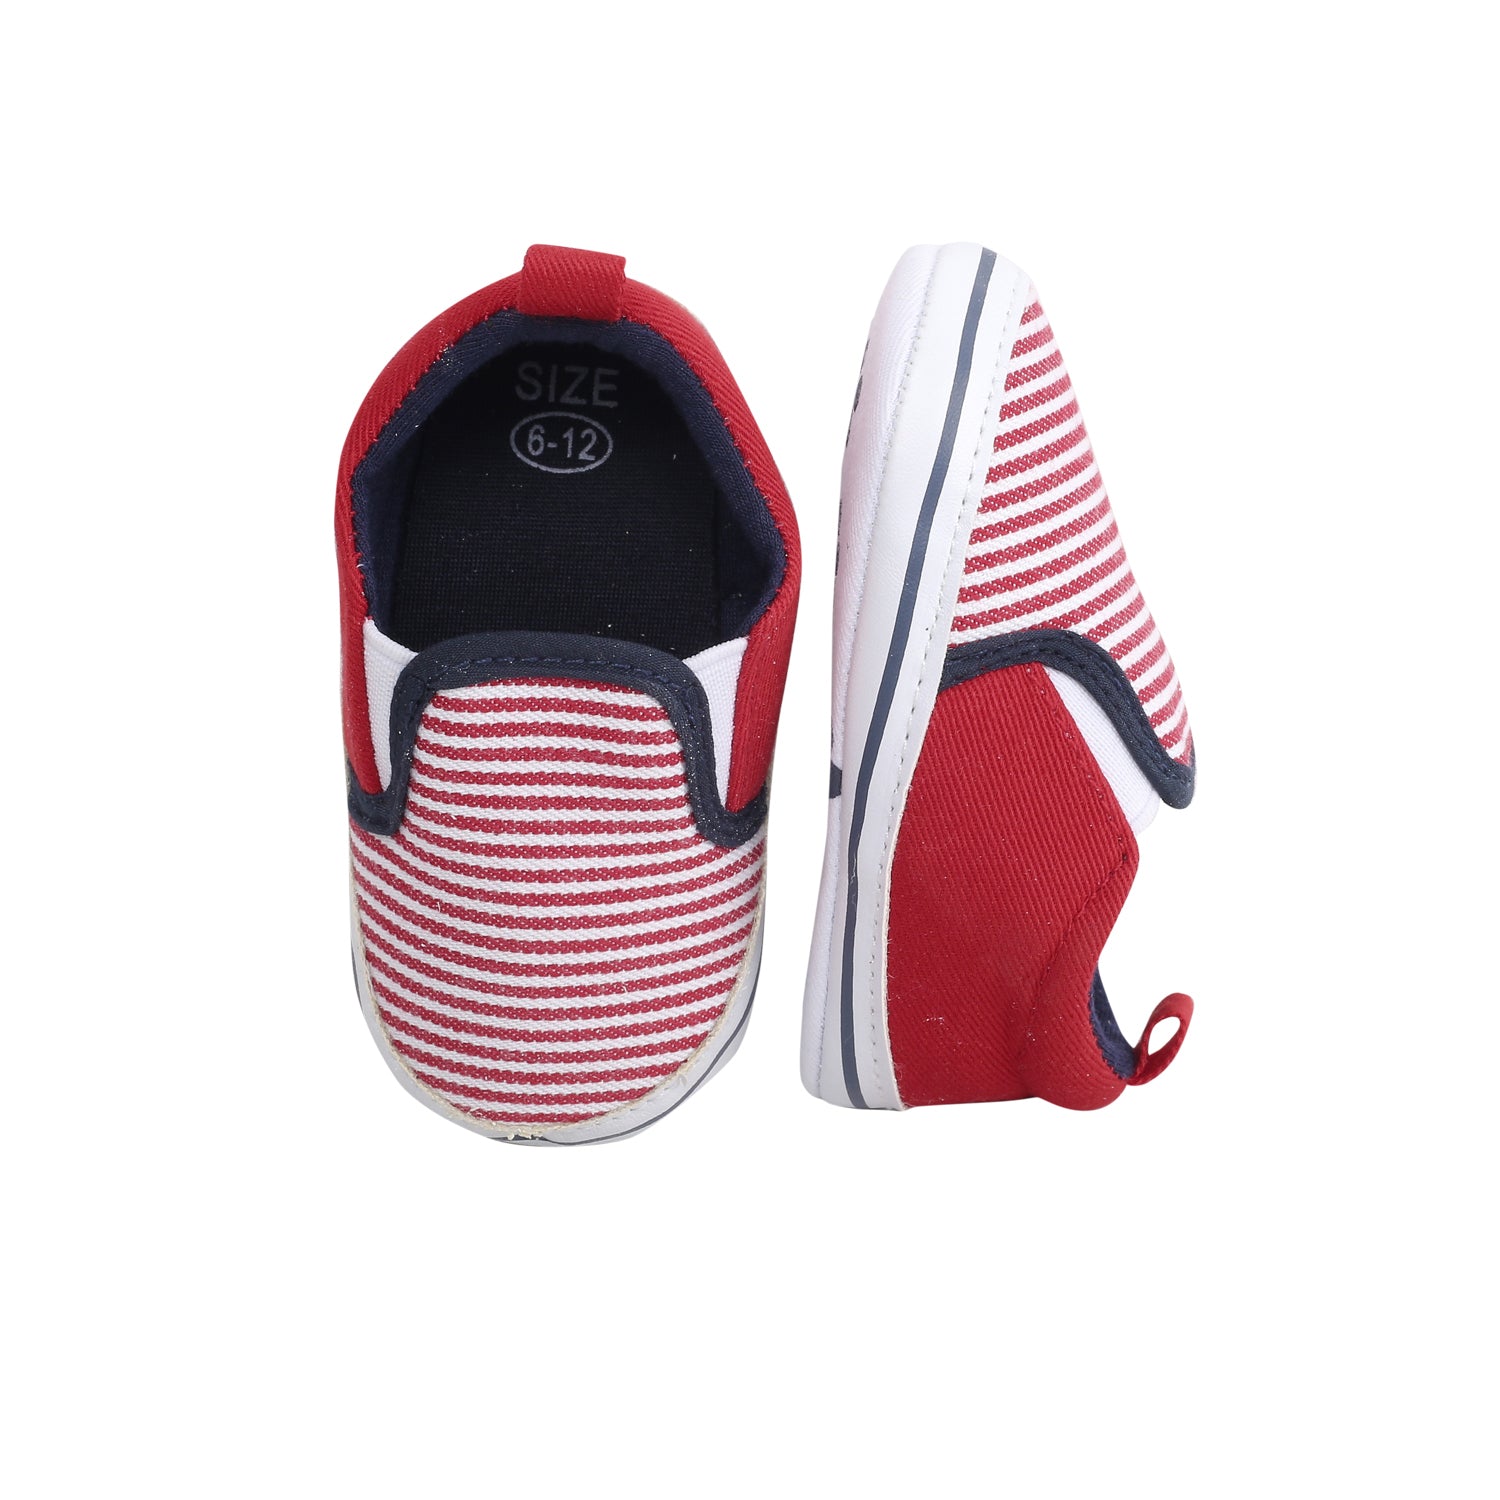 Baby Moo Striped Red Slip-On Booties